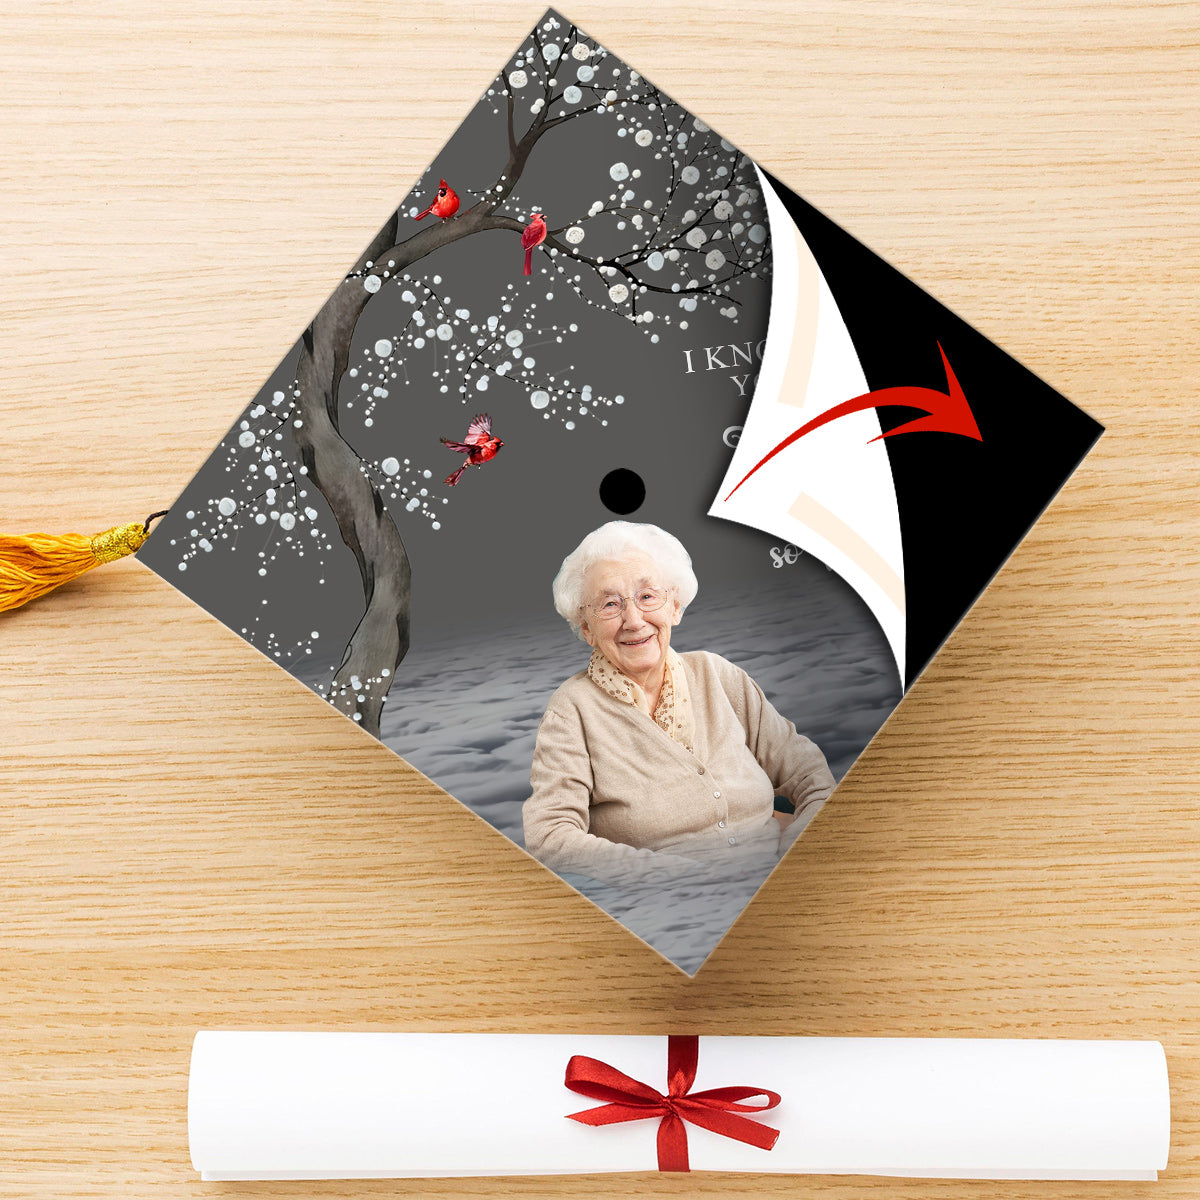 I Know You'd Be With Me - Personalized Graduation Cap Topper